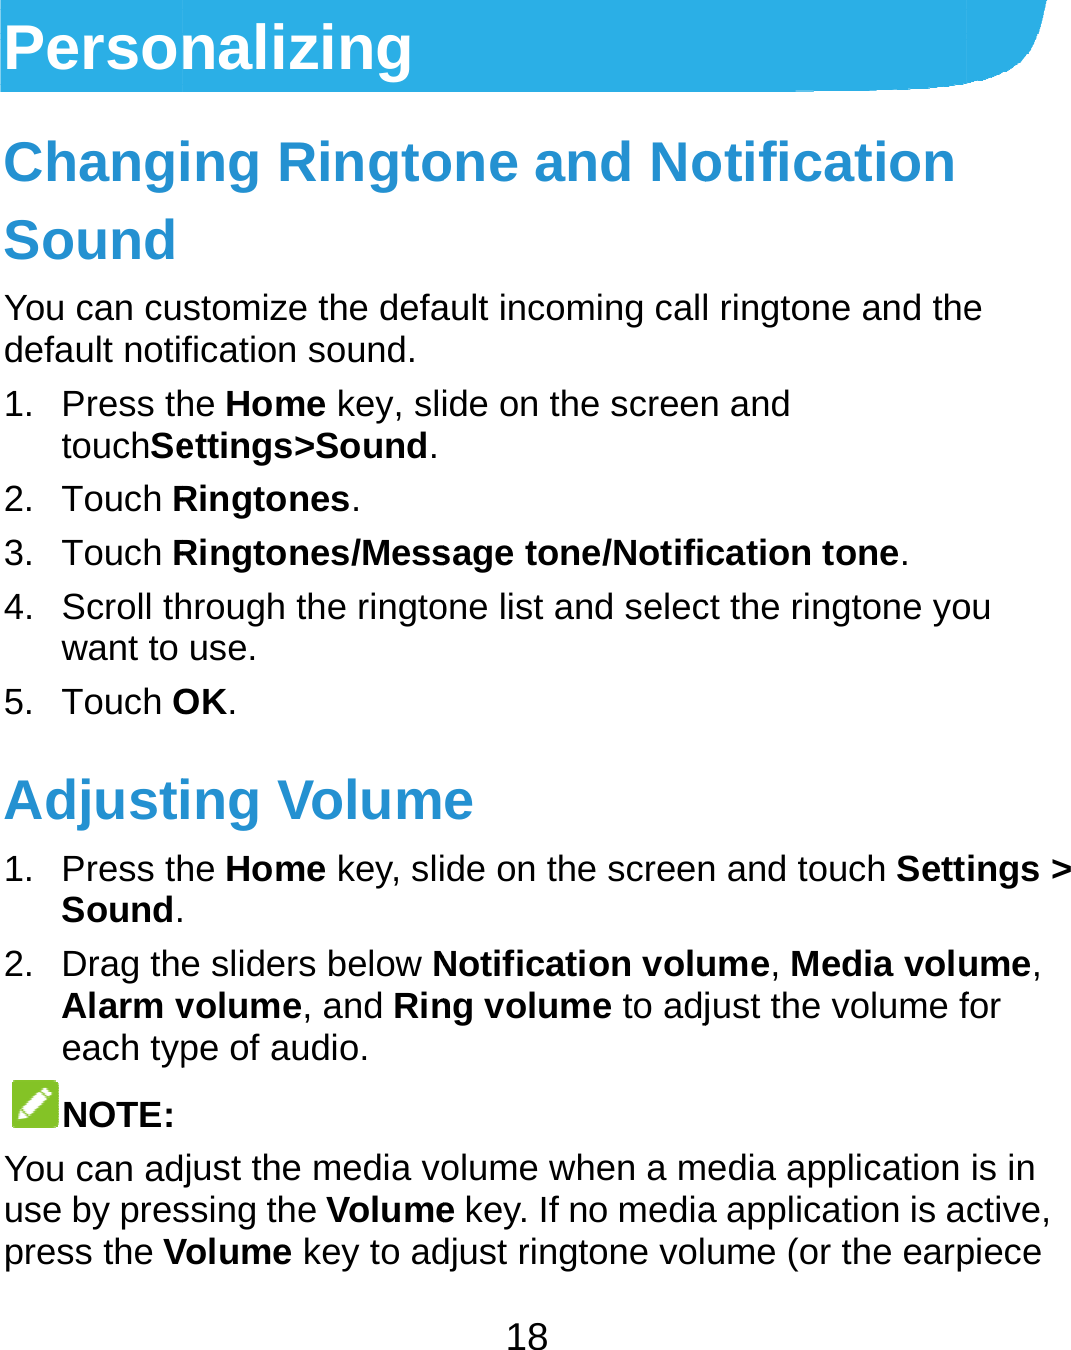  PersoChangiSound You can cudefault notif1. Press thtouchSe2. Touch R3. Touch R4. Scroll thwant to 5. Touch OAdjusti1. Press thSound.2. Drag theAlarm veach typNOTE: You can aduse by prespress the Vnalizing ing Ringtostomize the defafication sound. he Home key, sliettings&gt;Sound.Ringtones. Ringtones/Messhrough the ringtouse. OK. ing Volumhe Home key, sli e sliders below Nvolume, and Rinpe of audio. just the media vossing the VolumeVolume key to ad18 one and Noault incoming callide on the screensage tone/Notifione list and selece de on the screenNotification volung volume to adjolume when a me key. If no mediadjust ringtone volotification l ringtone and then and cation tone. ct the ringtone yon and touch Settume, Media volujust the volume fedia application a application is aume (or the earpe ou ings &gt; ume, for is in ctive, piece 